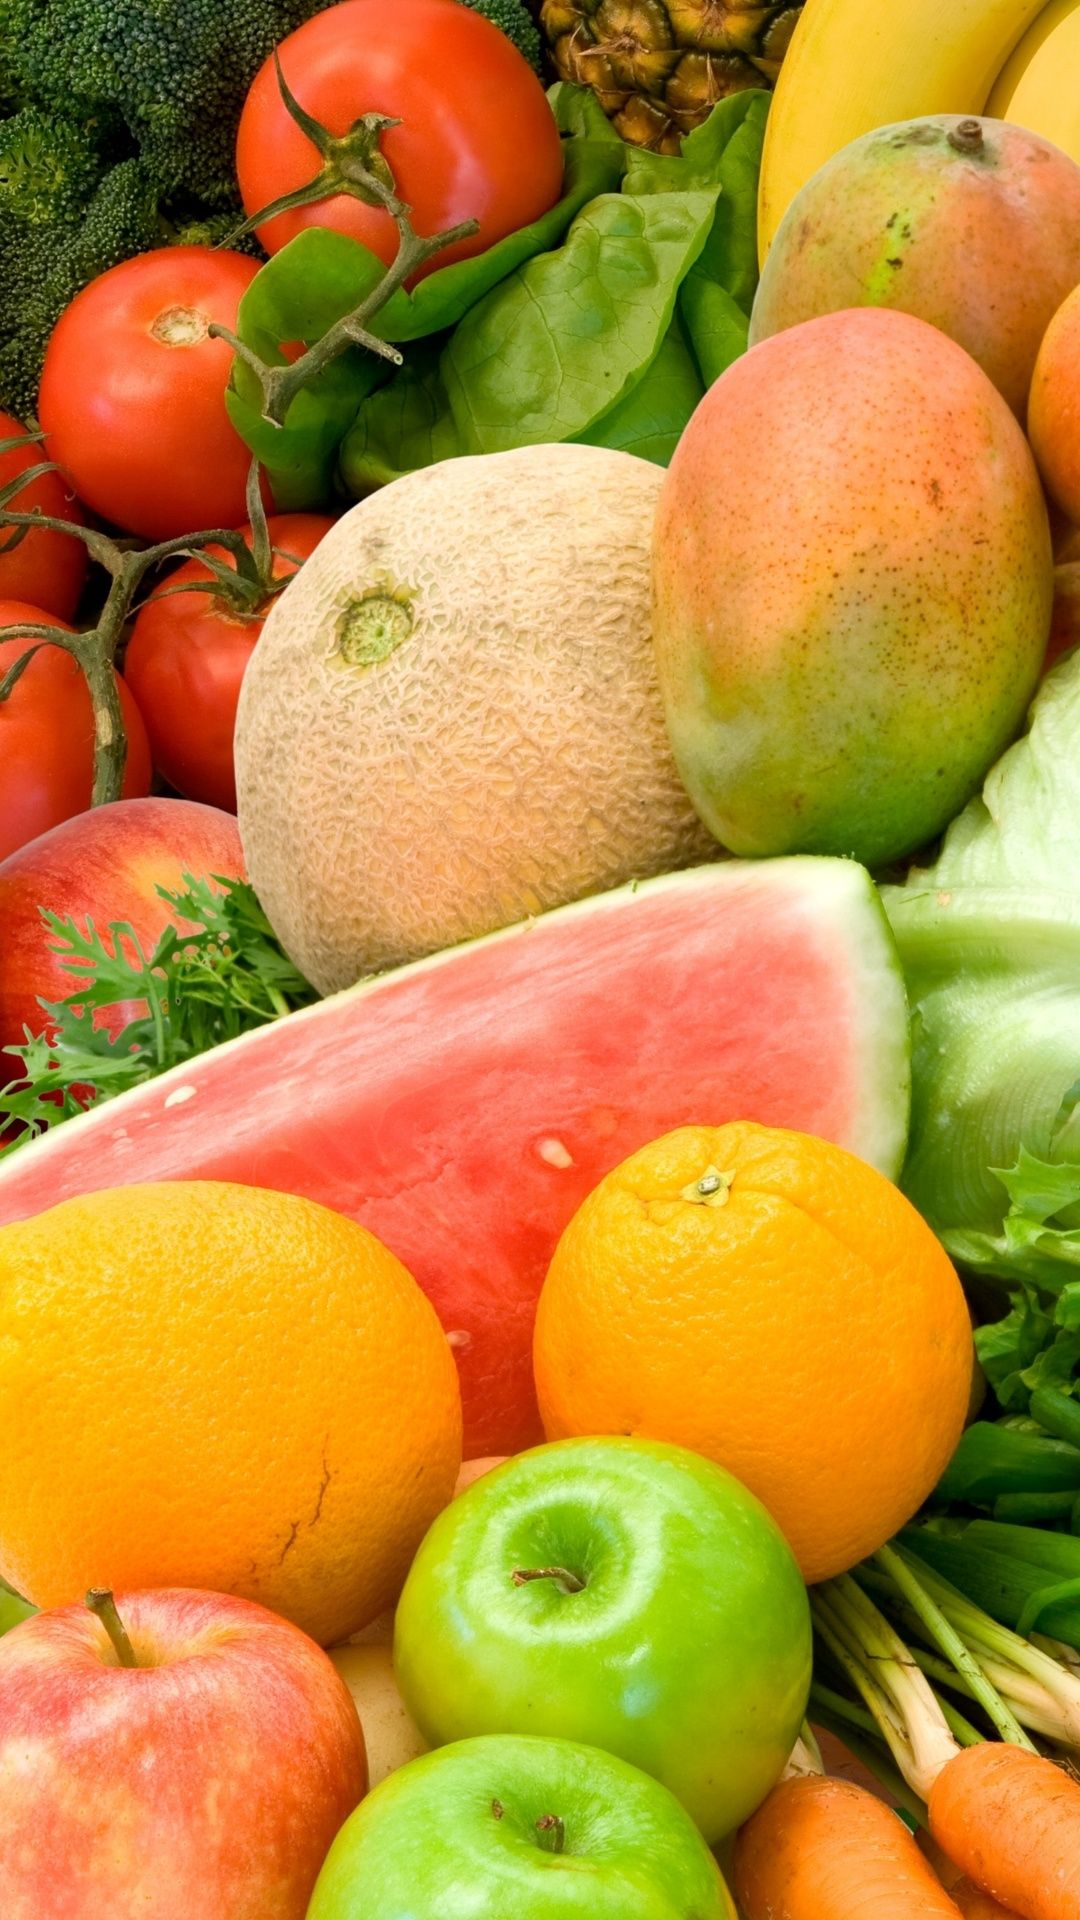 Ultra HD Vegetables And Fruits Image HD